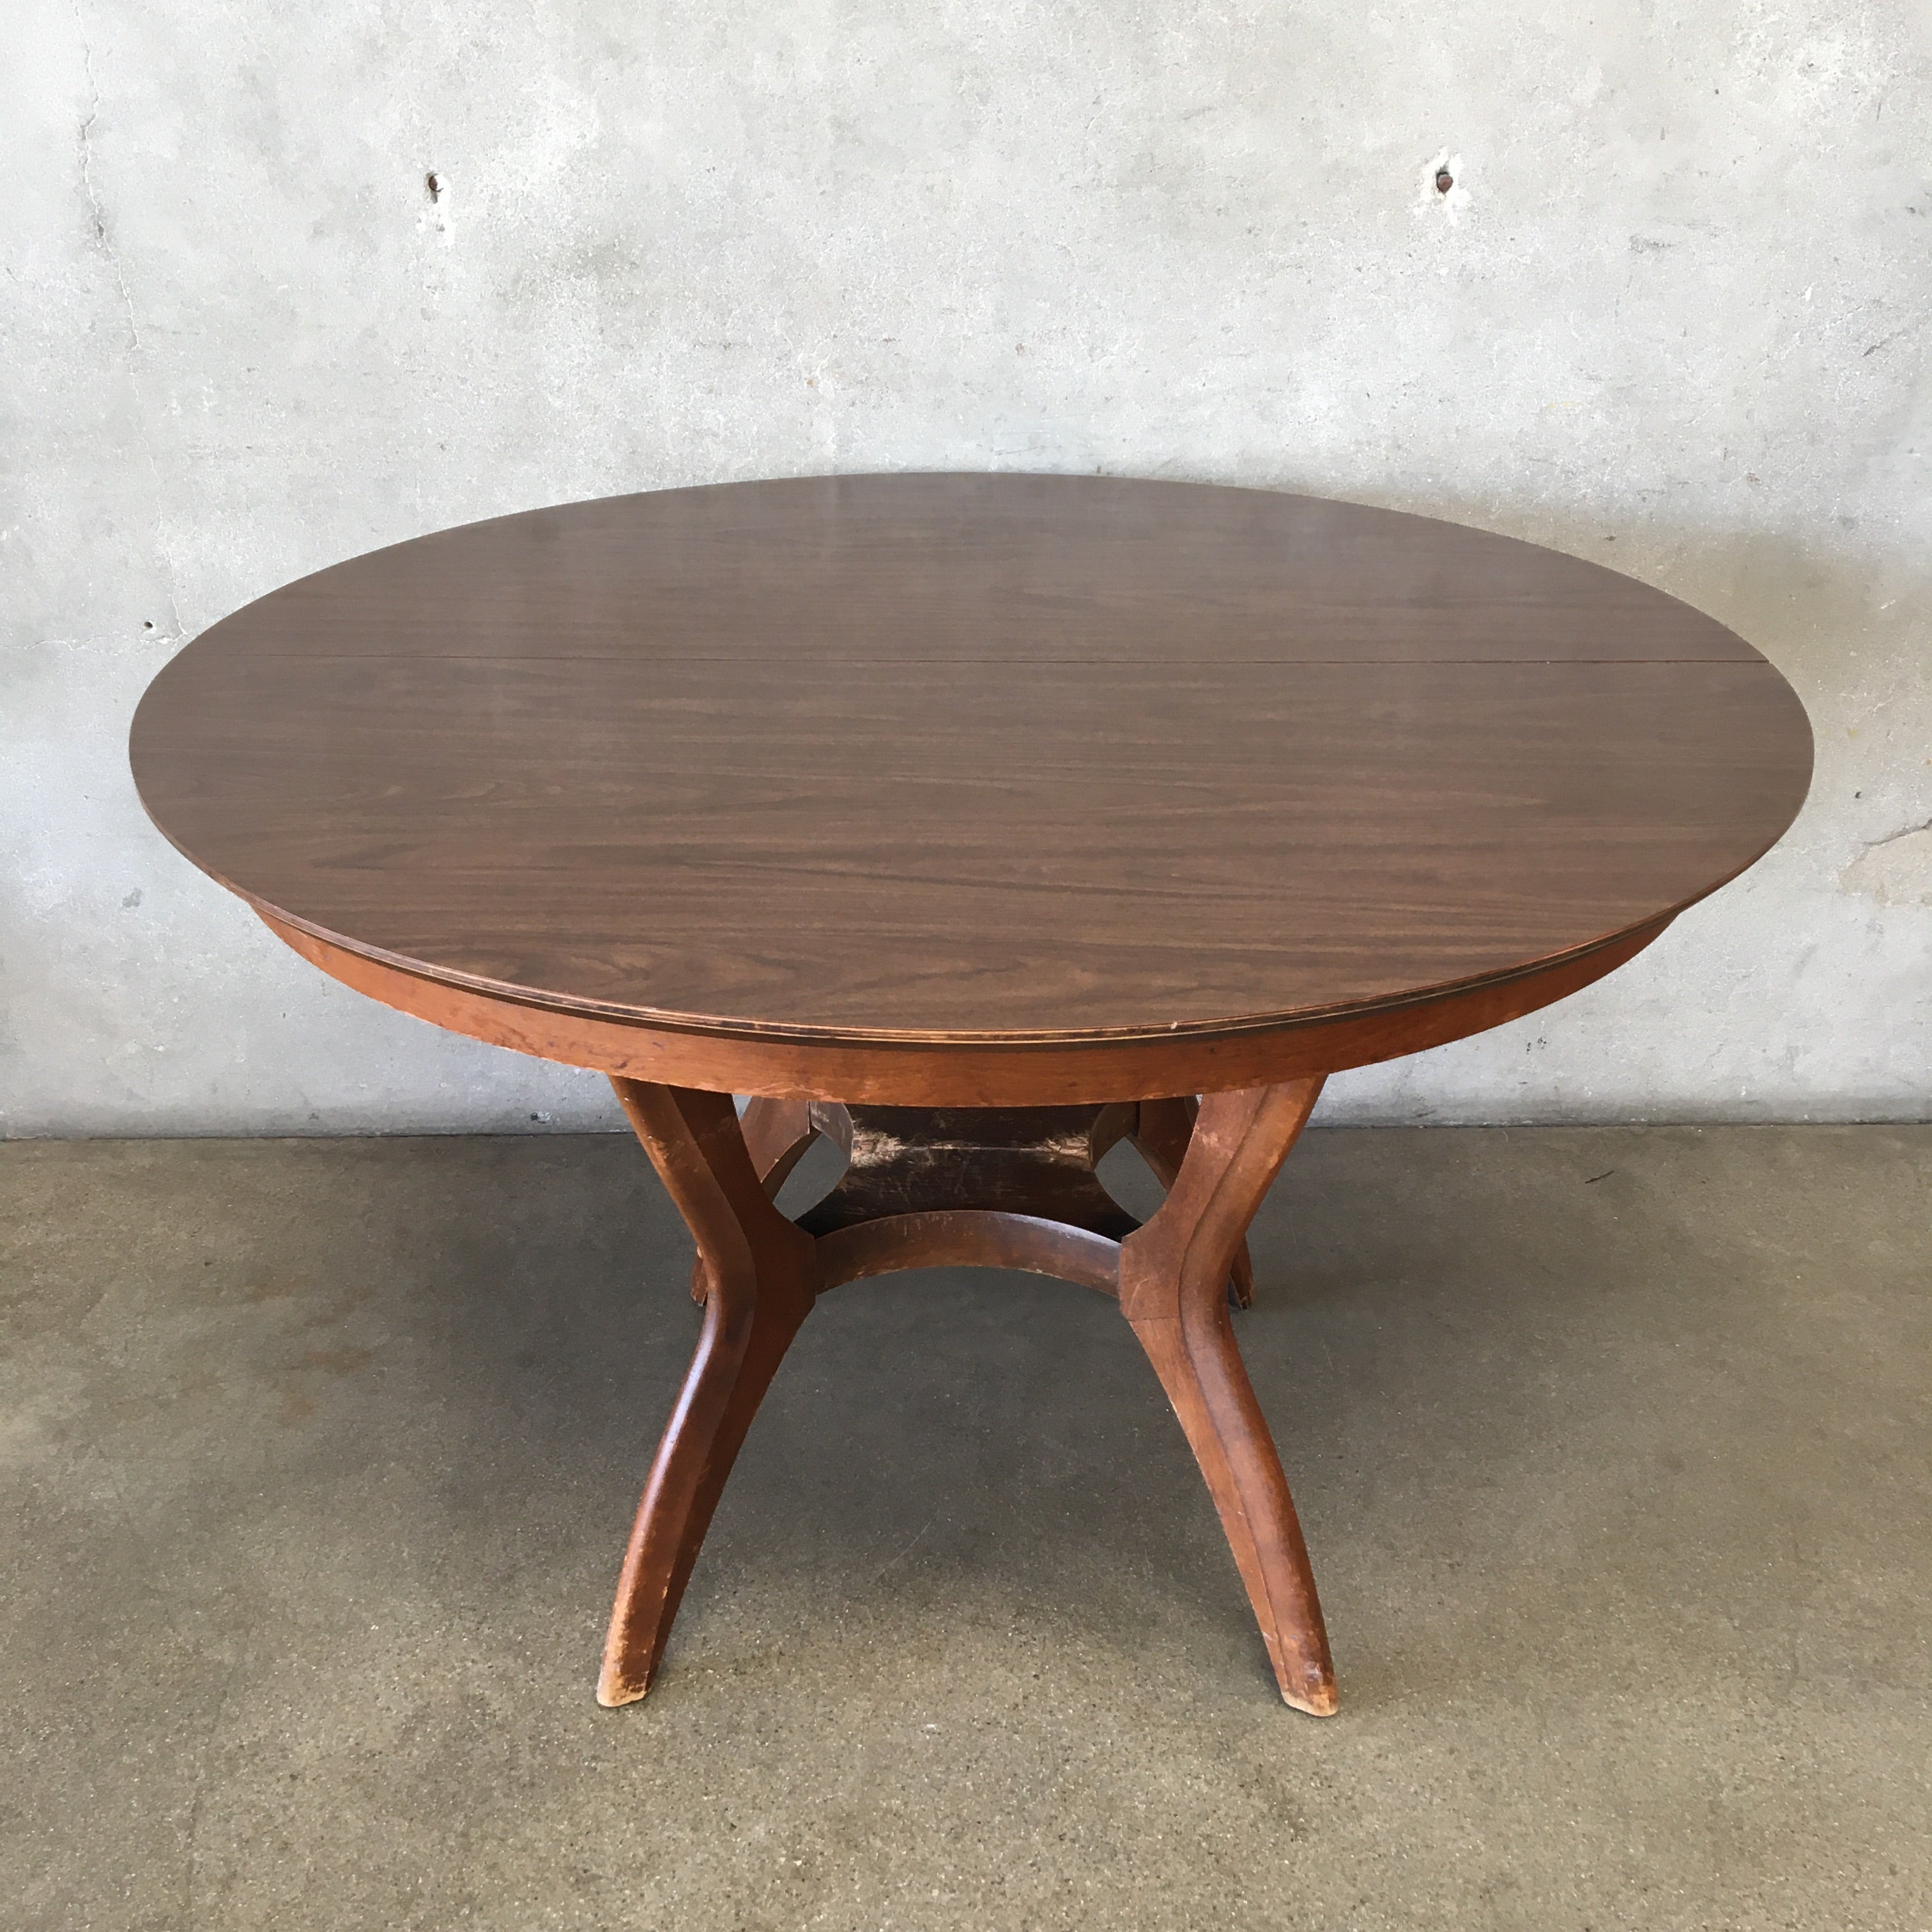 Vintage Mid Century Formica Top Dining Table With Leaves